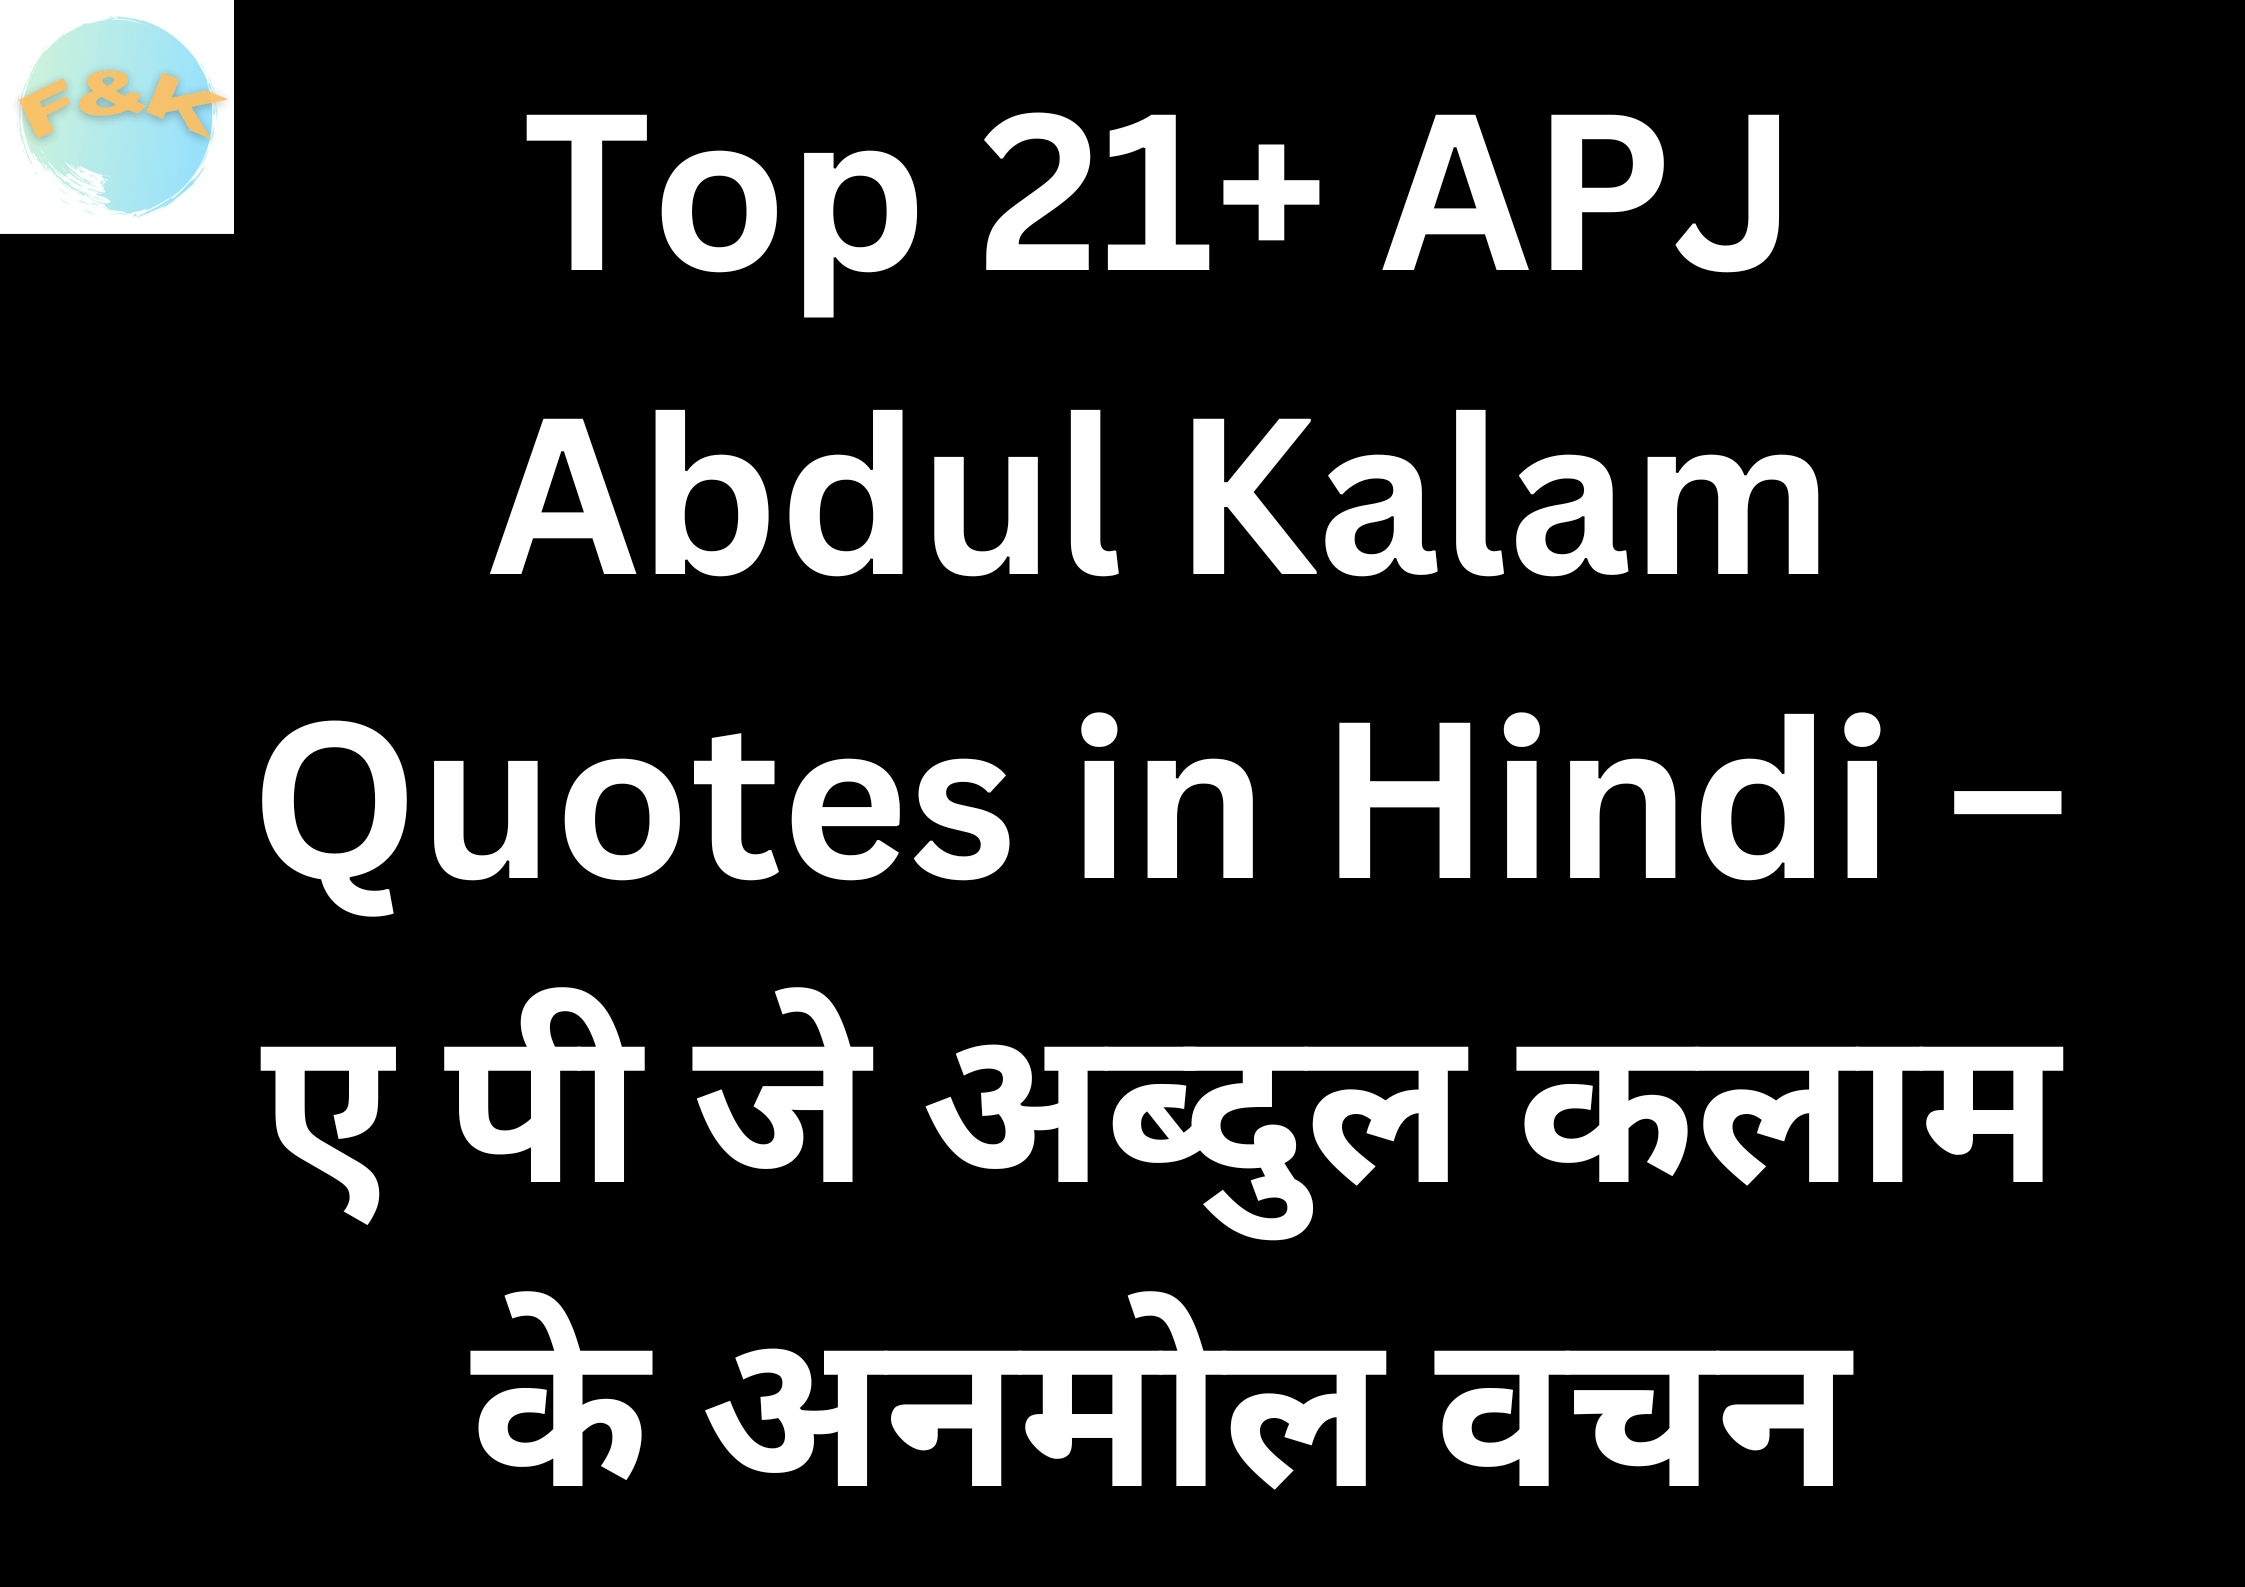 Motivational quotes in hindi for students by Apj Abdul kalam